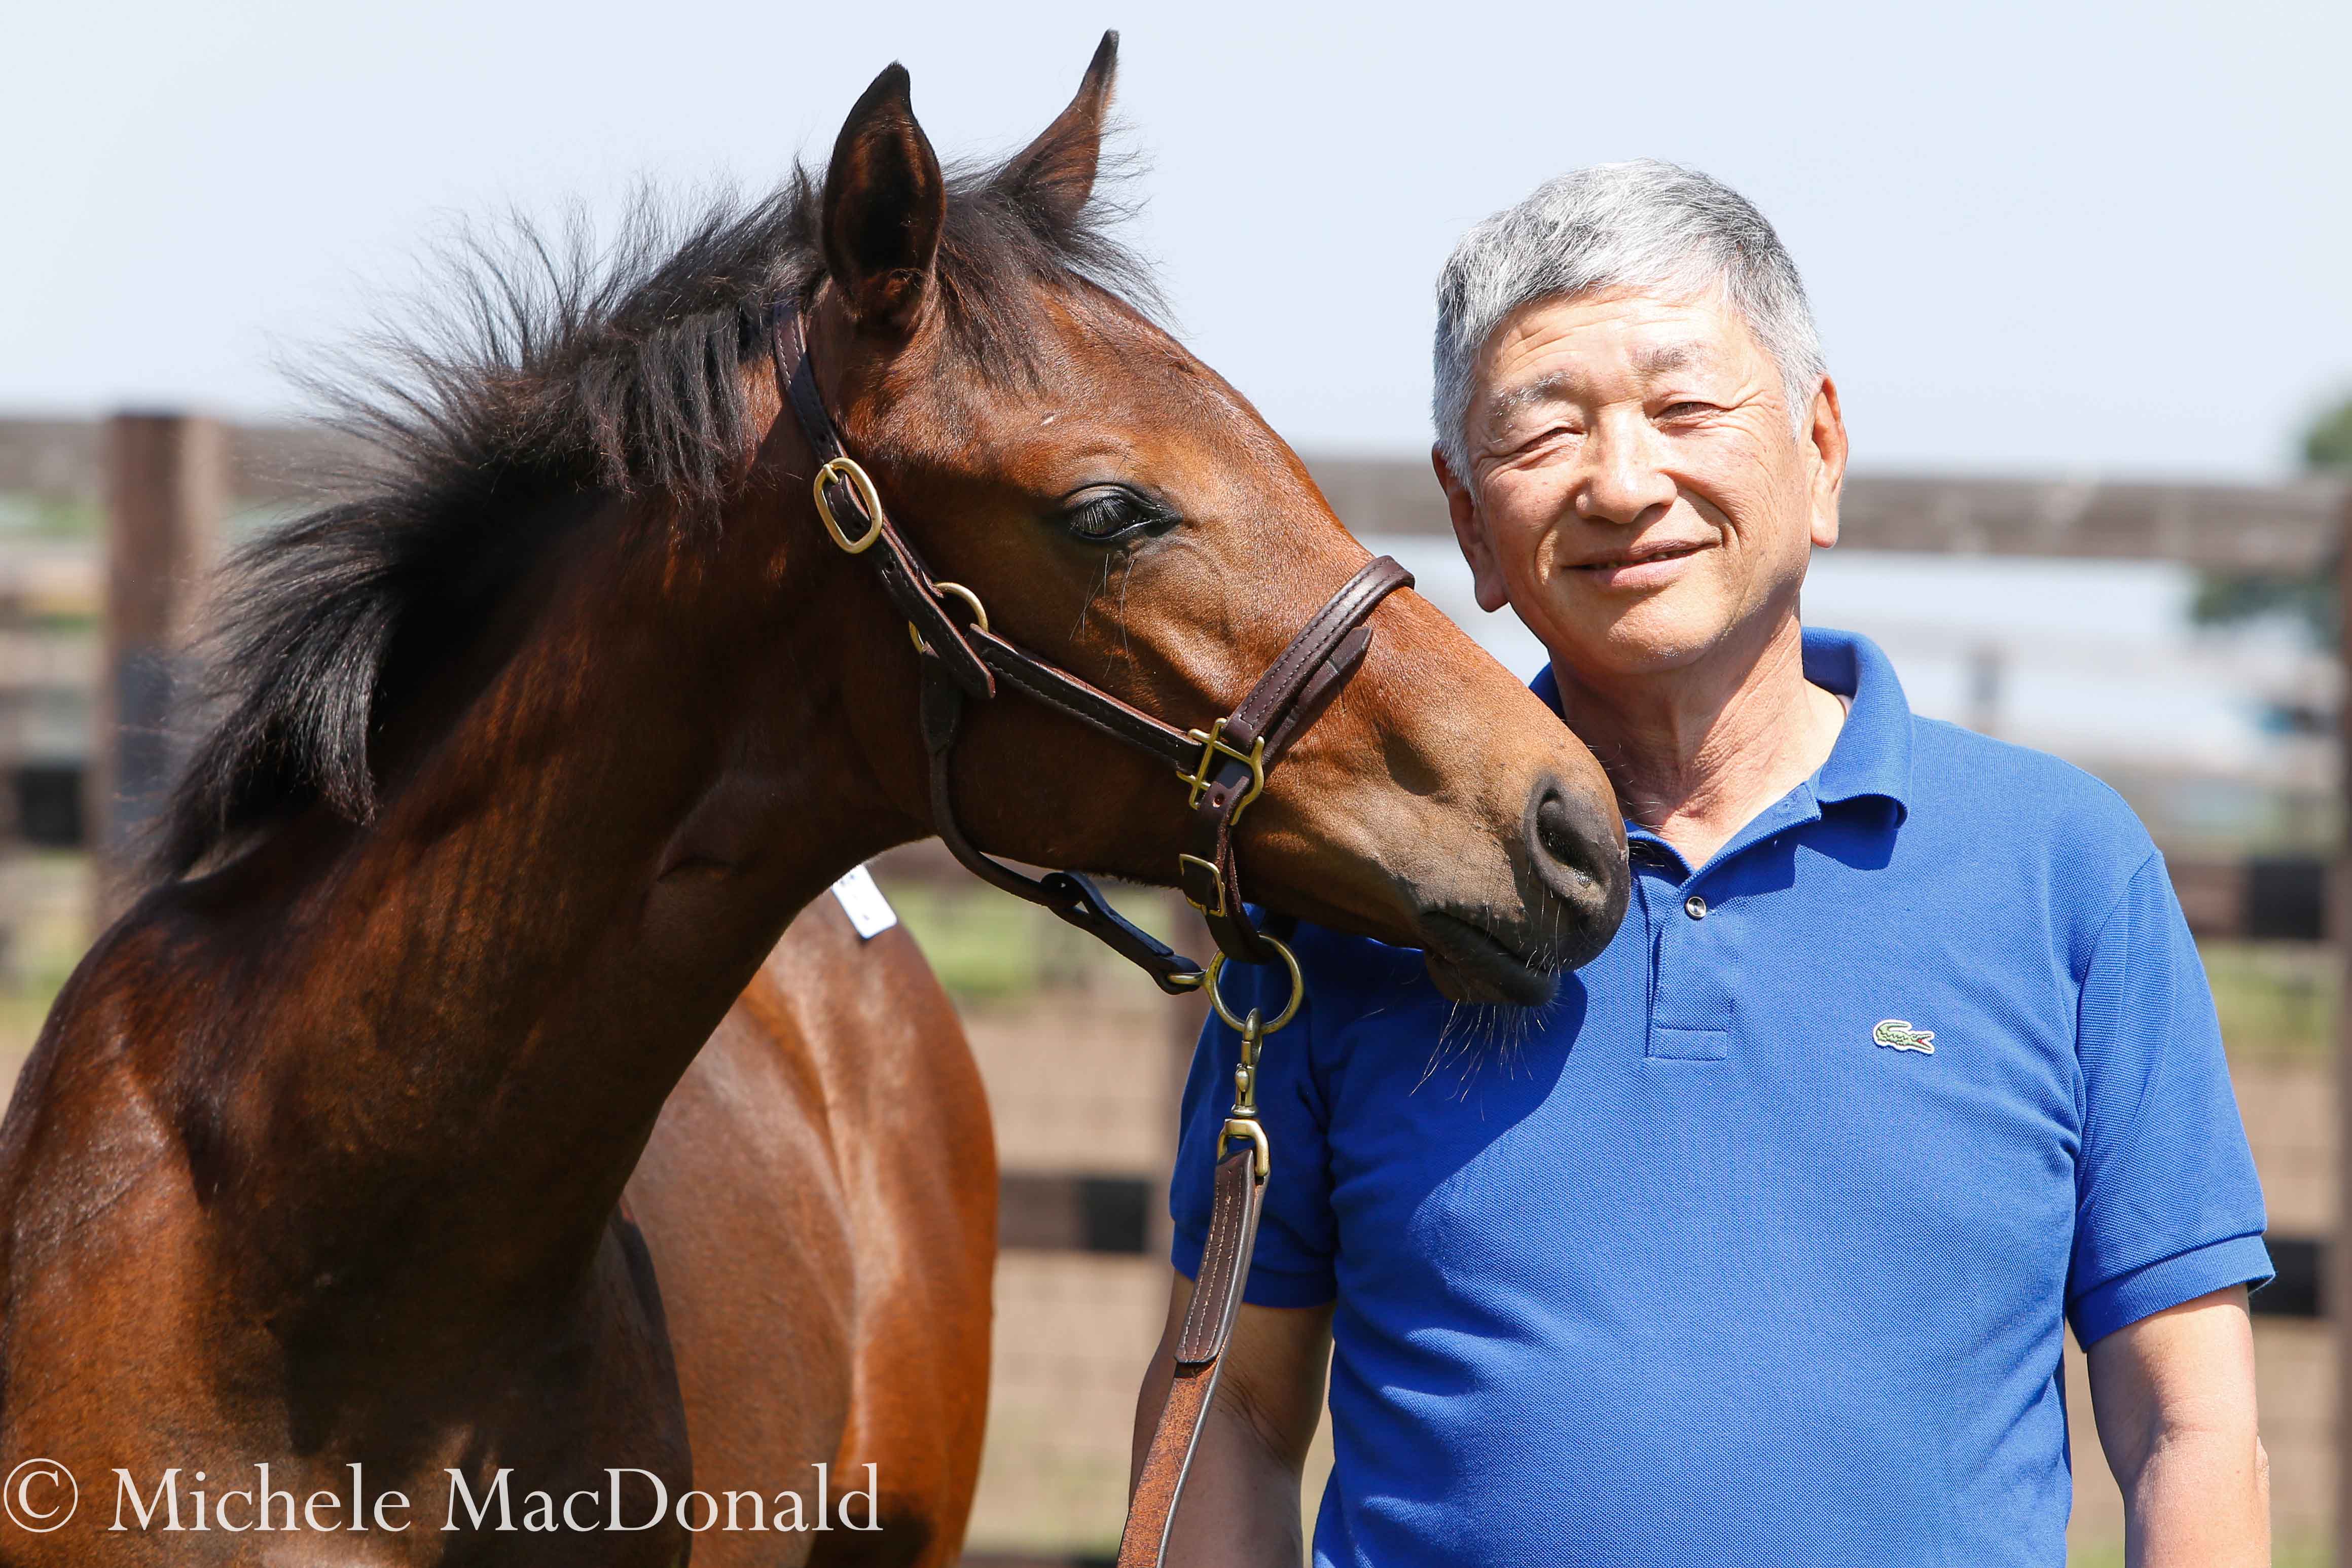 Proud consignor: Teruya Yoshida with a Kizuna colt out of Feodora consigned by his Shadai Farm. The foal went to Shinji Maeda for the equivalent of $789,000. Photo: Michele MacDonald